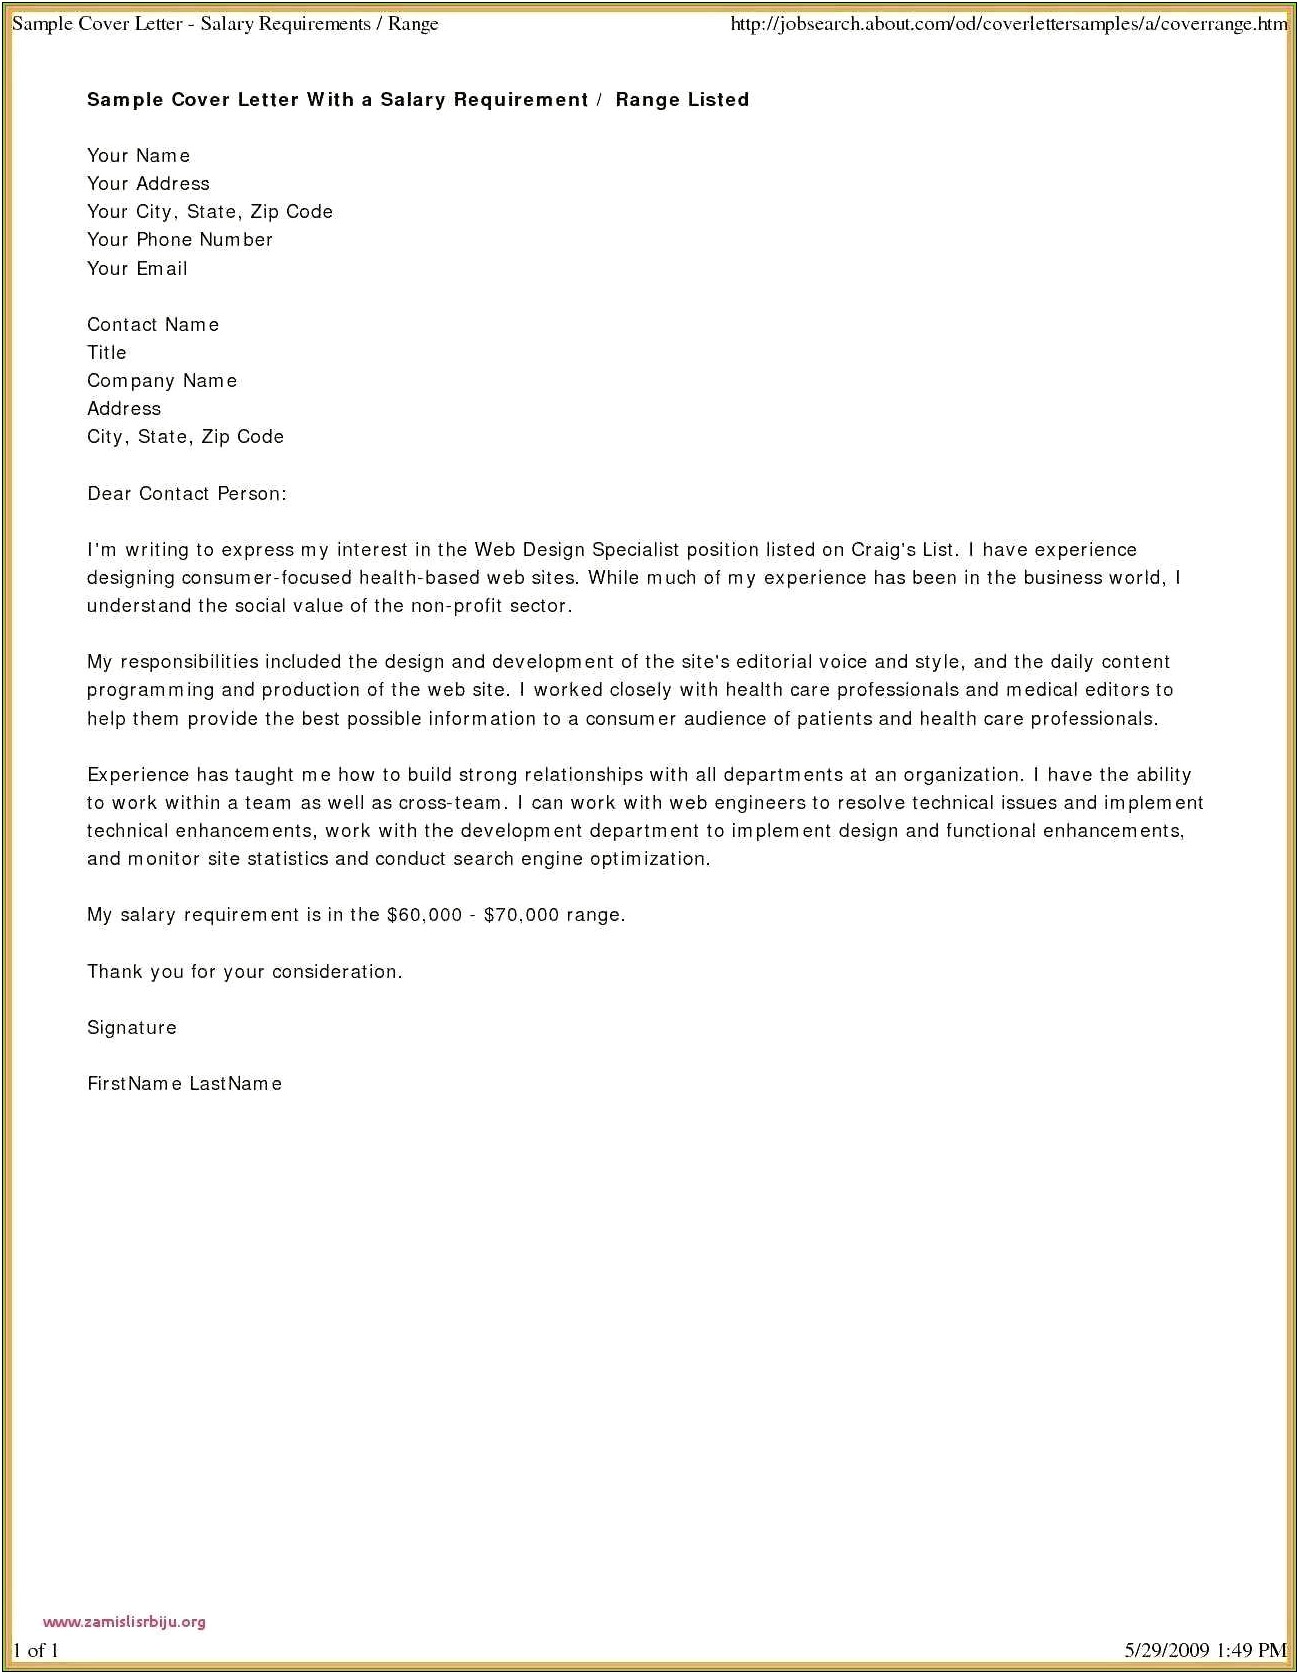 Cover Letter For Resume Surgical Tech